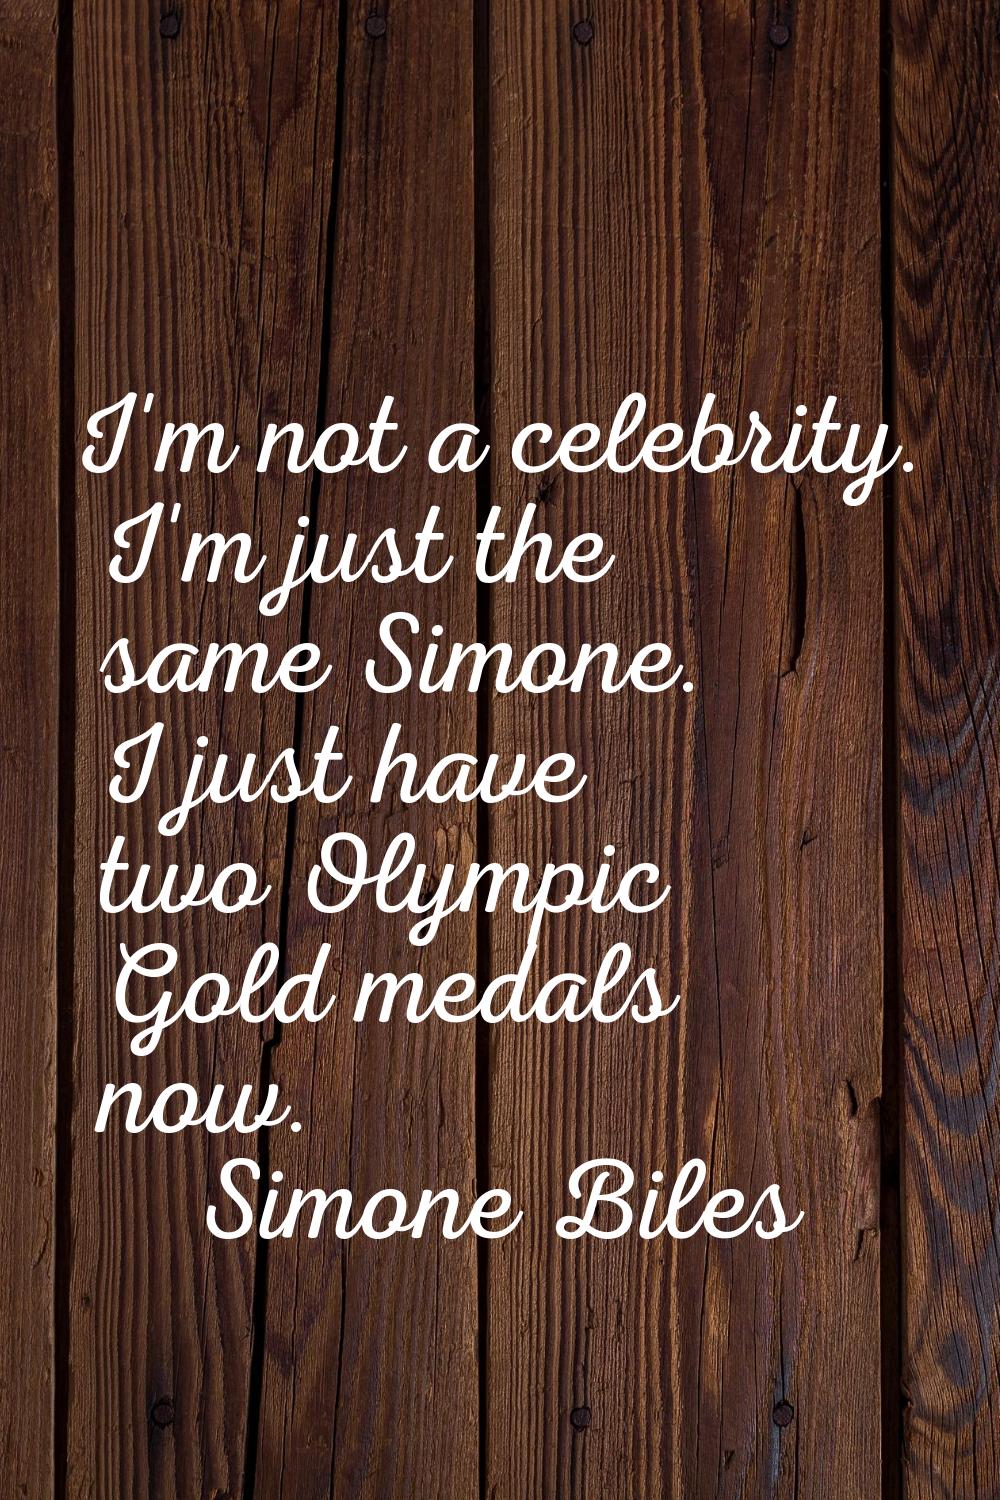 I'm not a celebrity. I'm just the same Simone. I just have two Olympic Gold medals now.